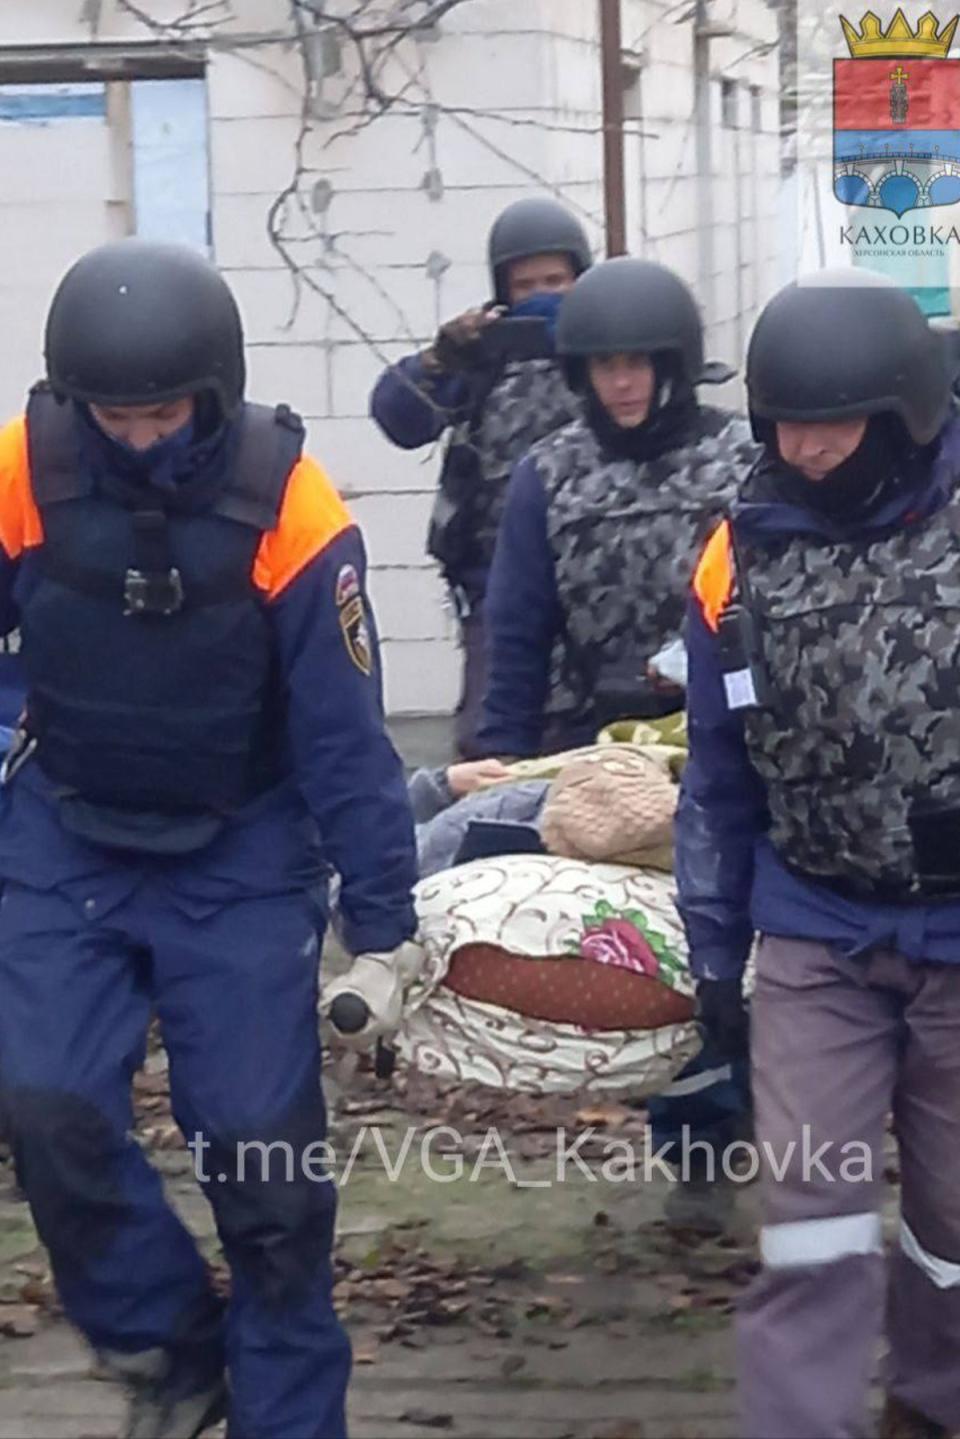 Russia’s appointed administration in the occupied south of Ukraine shares images of people with disabilities they have removed from institutions in Kherson (Telegram)